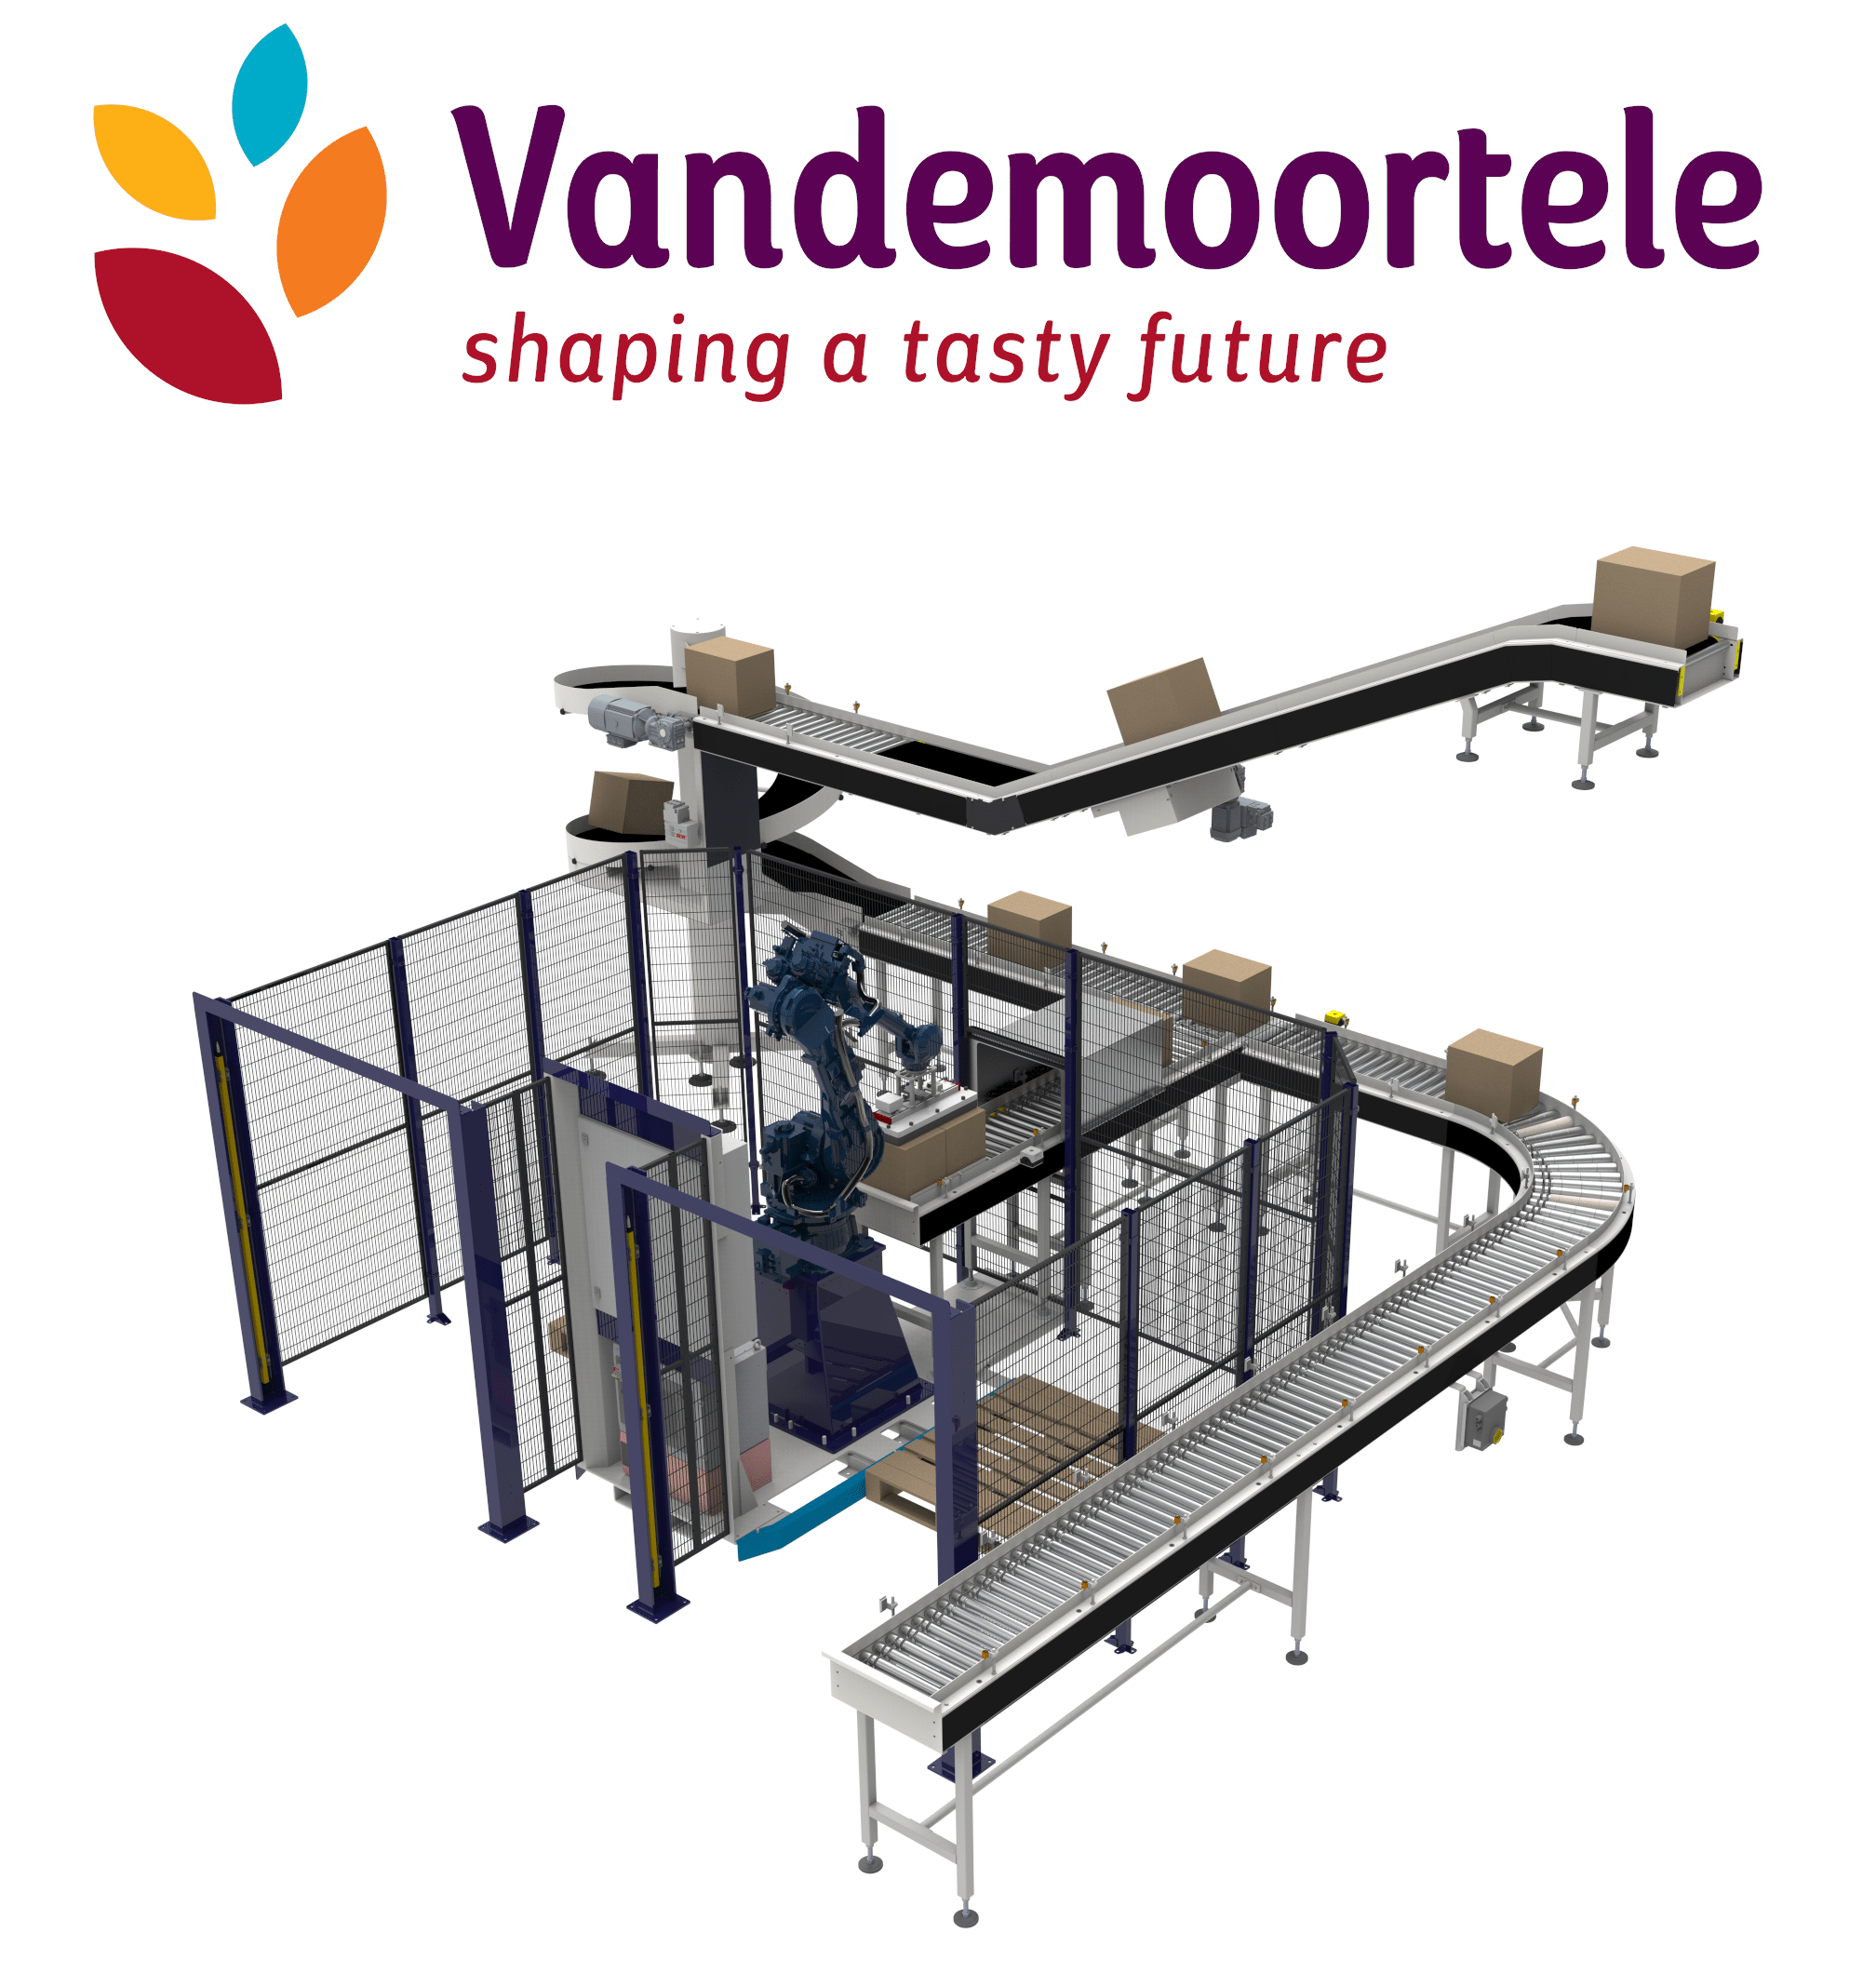 CKF Systems install Standard Robot Palletising cell in leading European food group, Vandemoortele